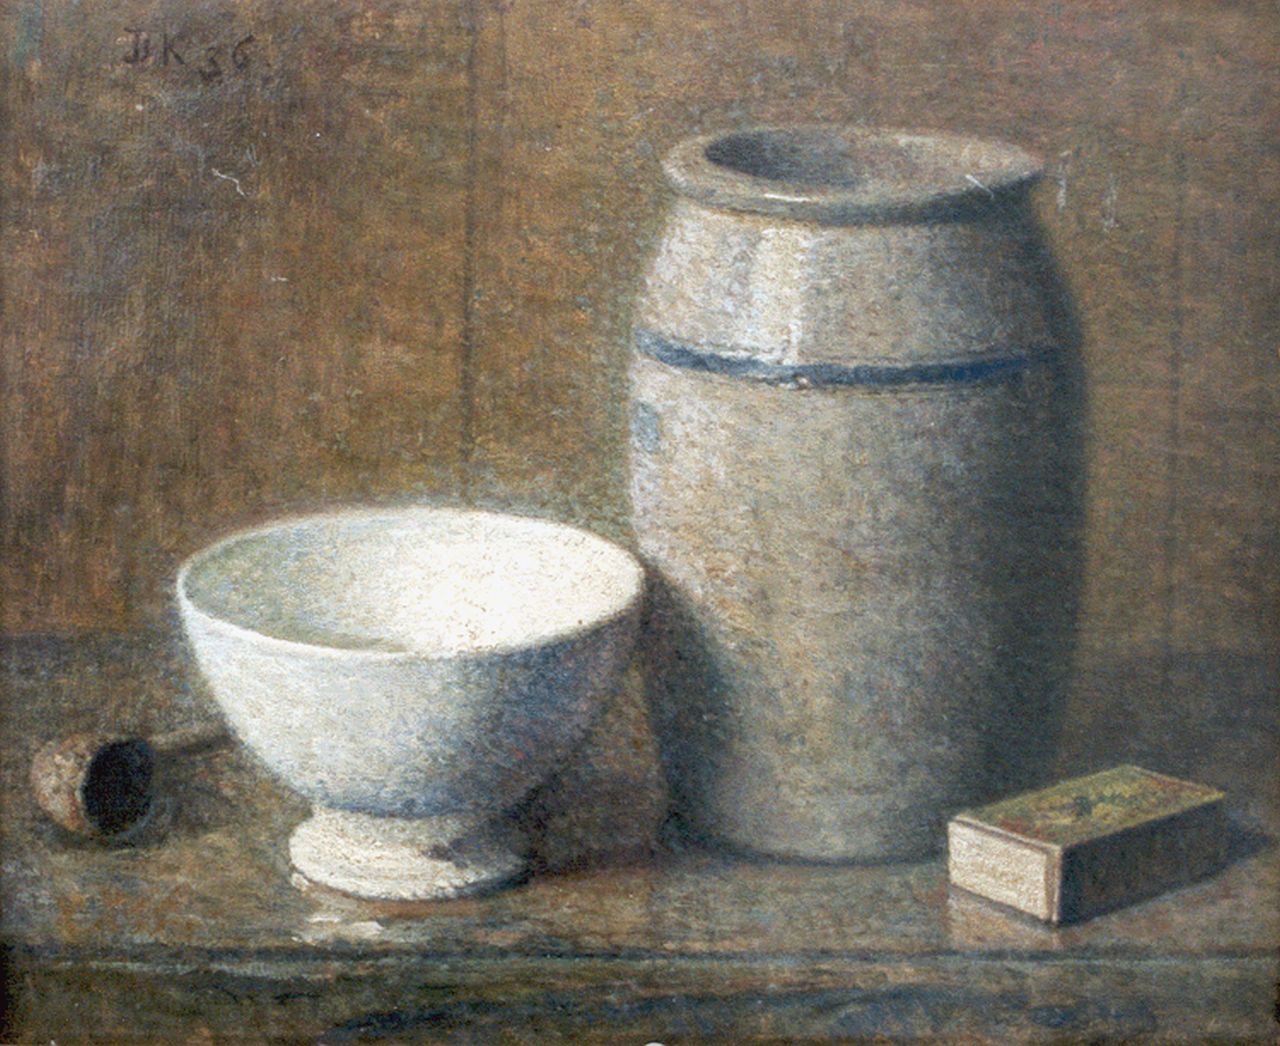 Komter D.  | Douwe Komter, A still life with a jar and a Cologne pot, Öl auf Malereifaser 27,0 x 32,4 cm, signed u.l. with initials und dated '36